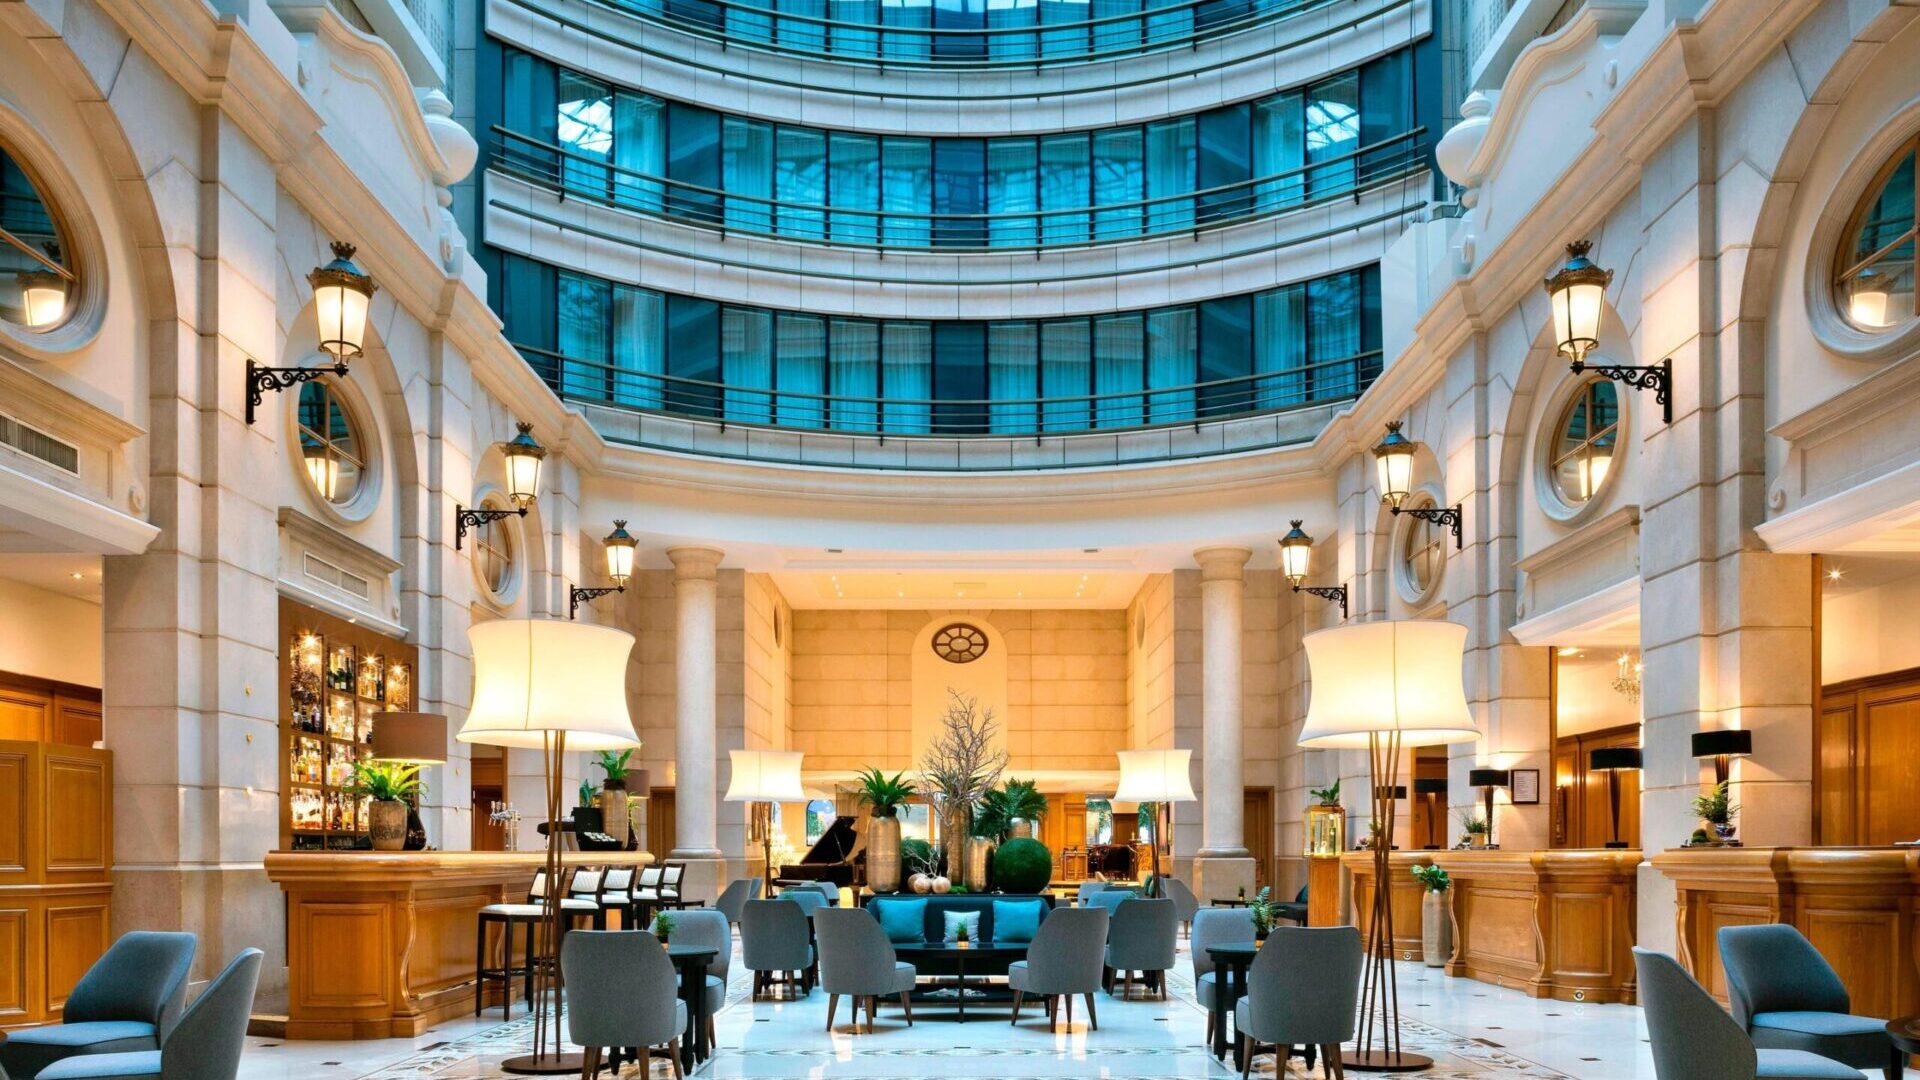 Paris Marriott Champs Elysees Hotel 8 scaled 1920x1920 1 edited